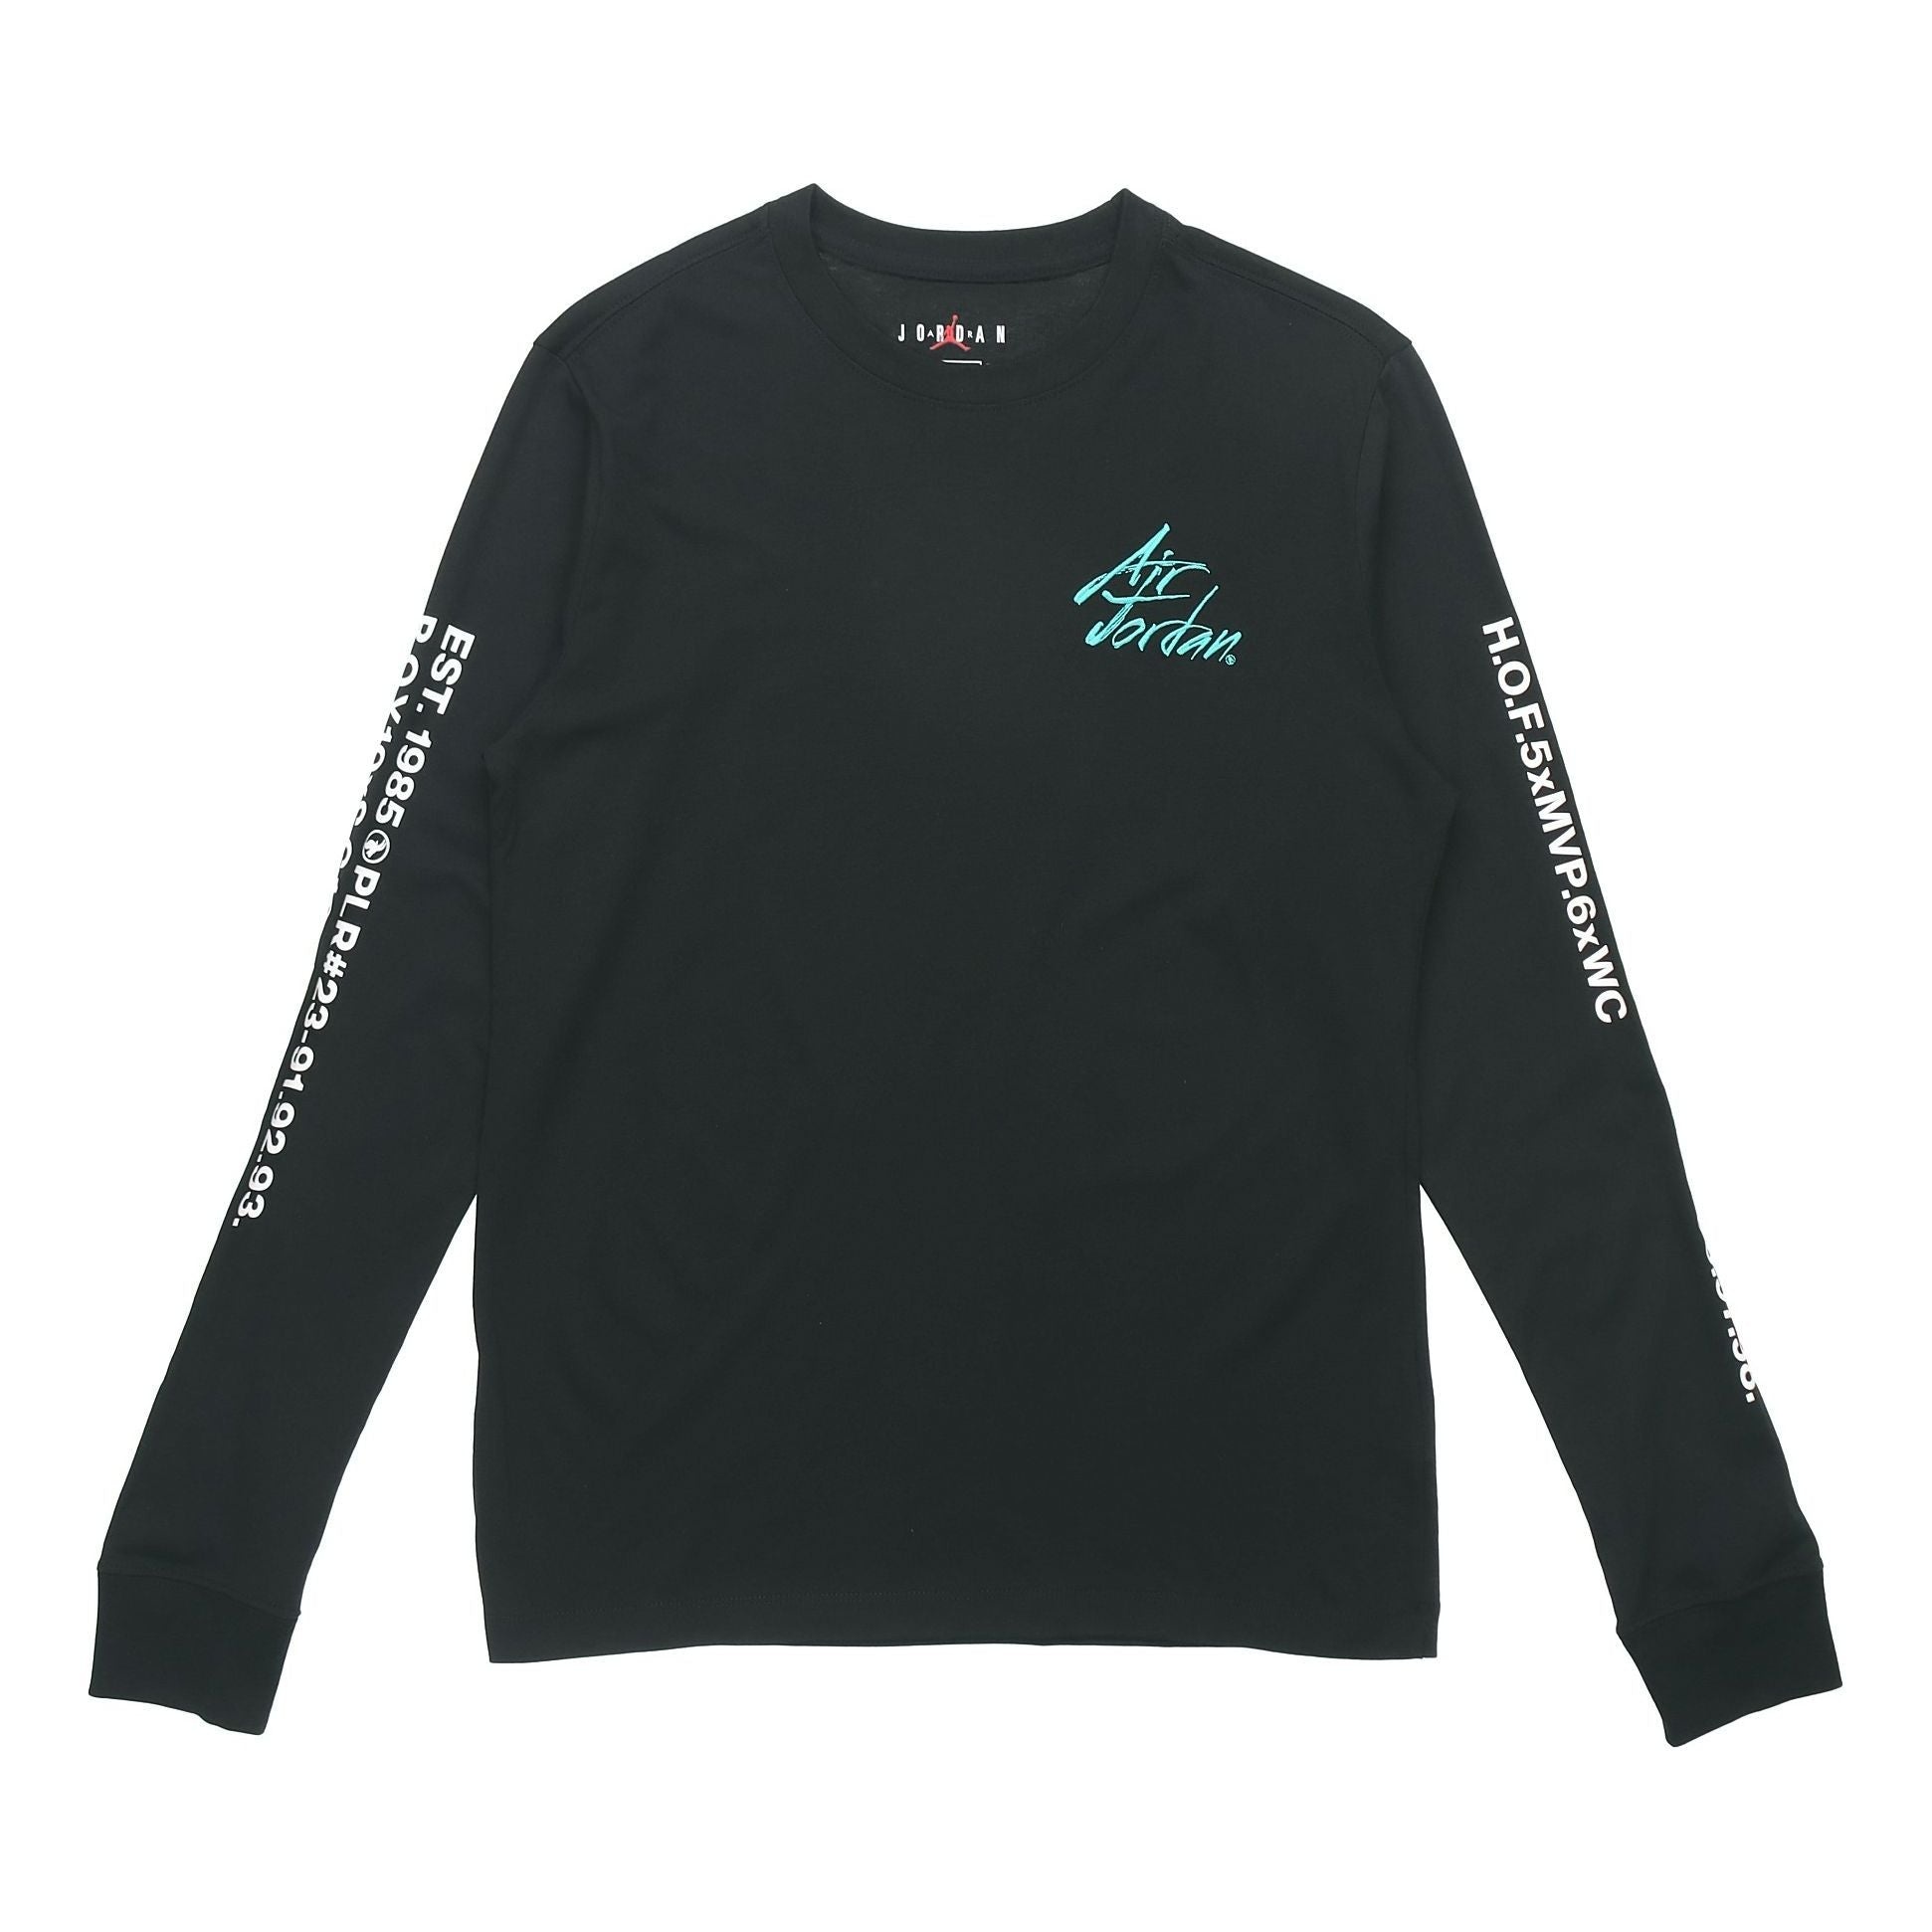 Air Jordan Embroidered Alphabet Printing Casual Sports Round Neck Long Sleeves Black DC6647-010 - 1